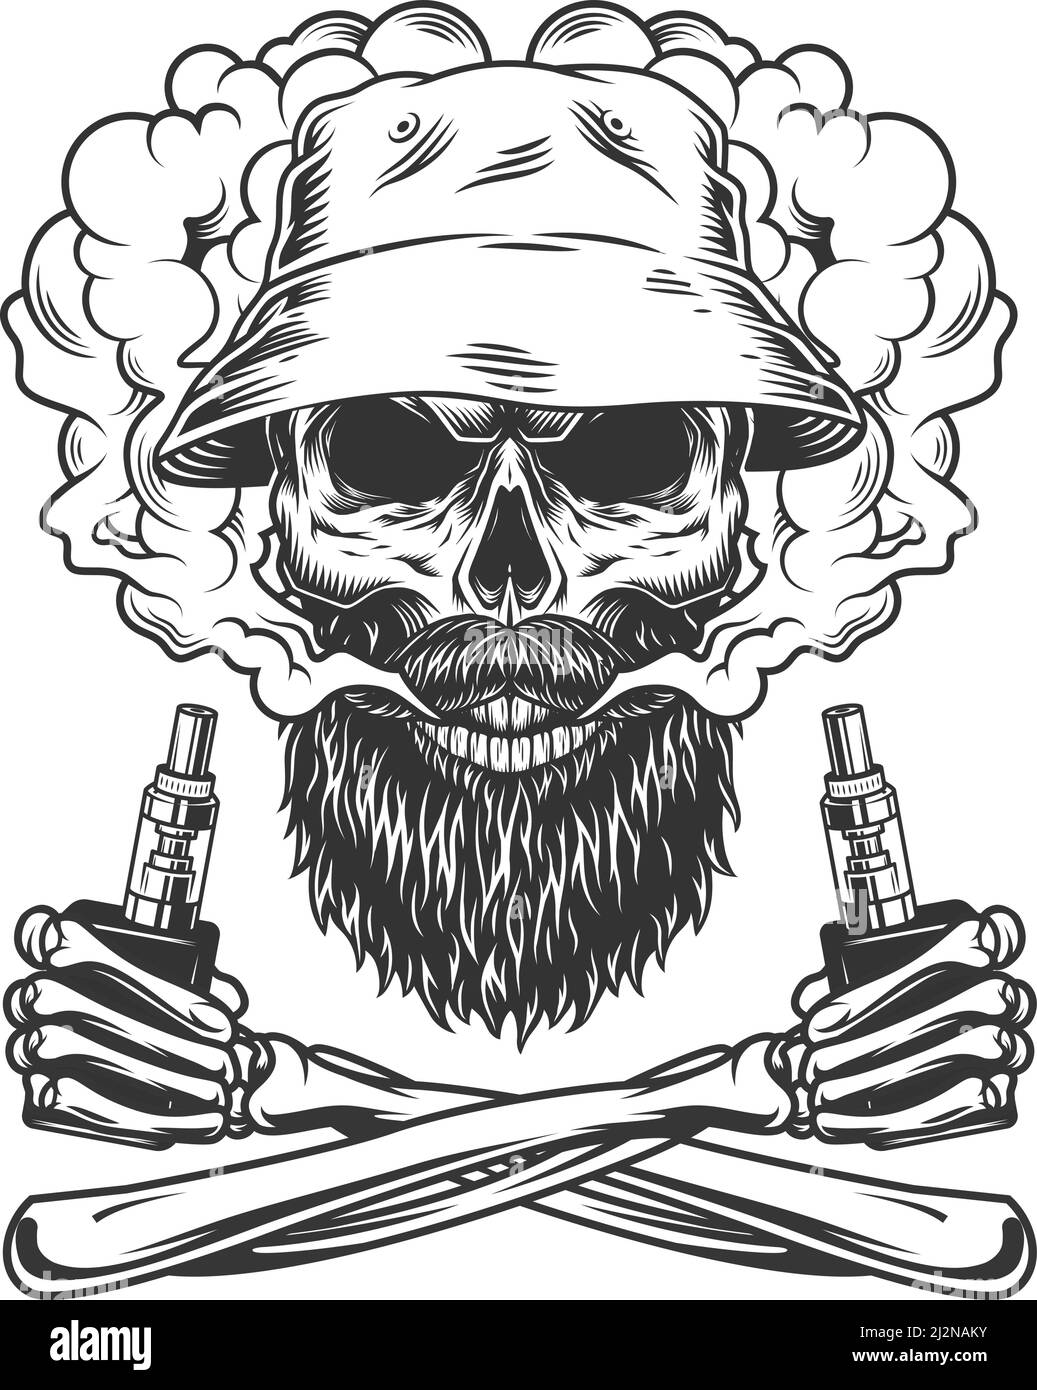 Bearded and mustached skull wearing panama hat in smoke cloud with crossed skeleton hands holding vaporizers in vintage style isolated vector illustra Stock Vector